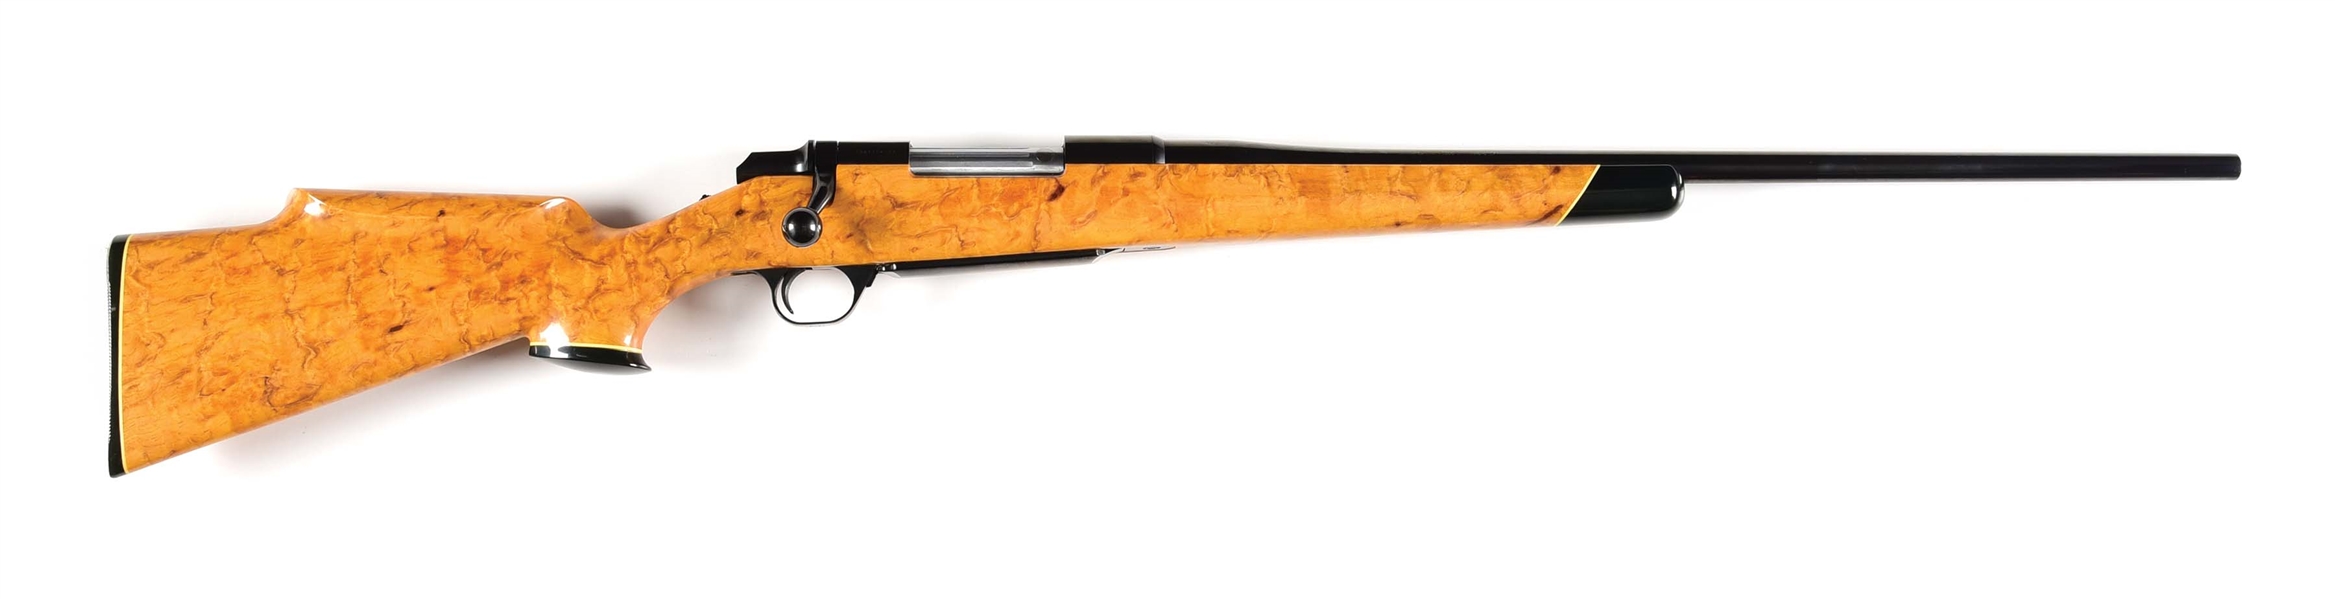 (M) RED ELM BURL (ULMUS RUMBRA) STOCKED BROWNING BBR BOLT ACTION RIFLE.